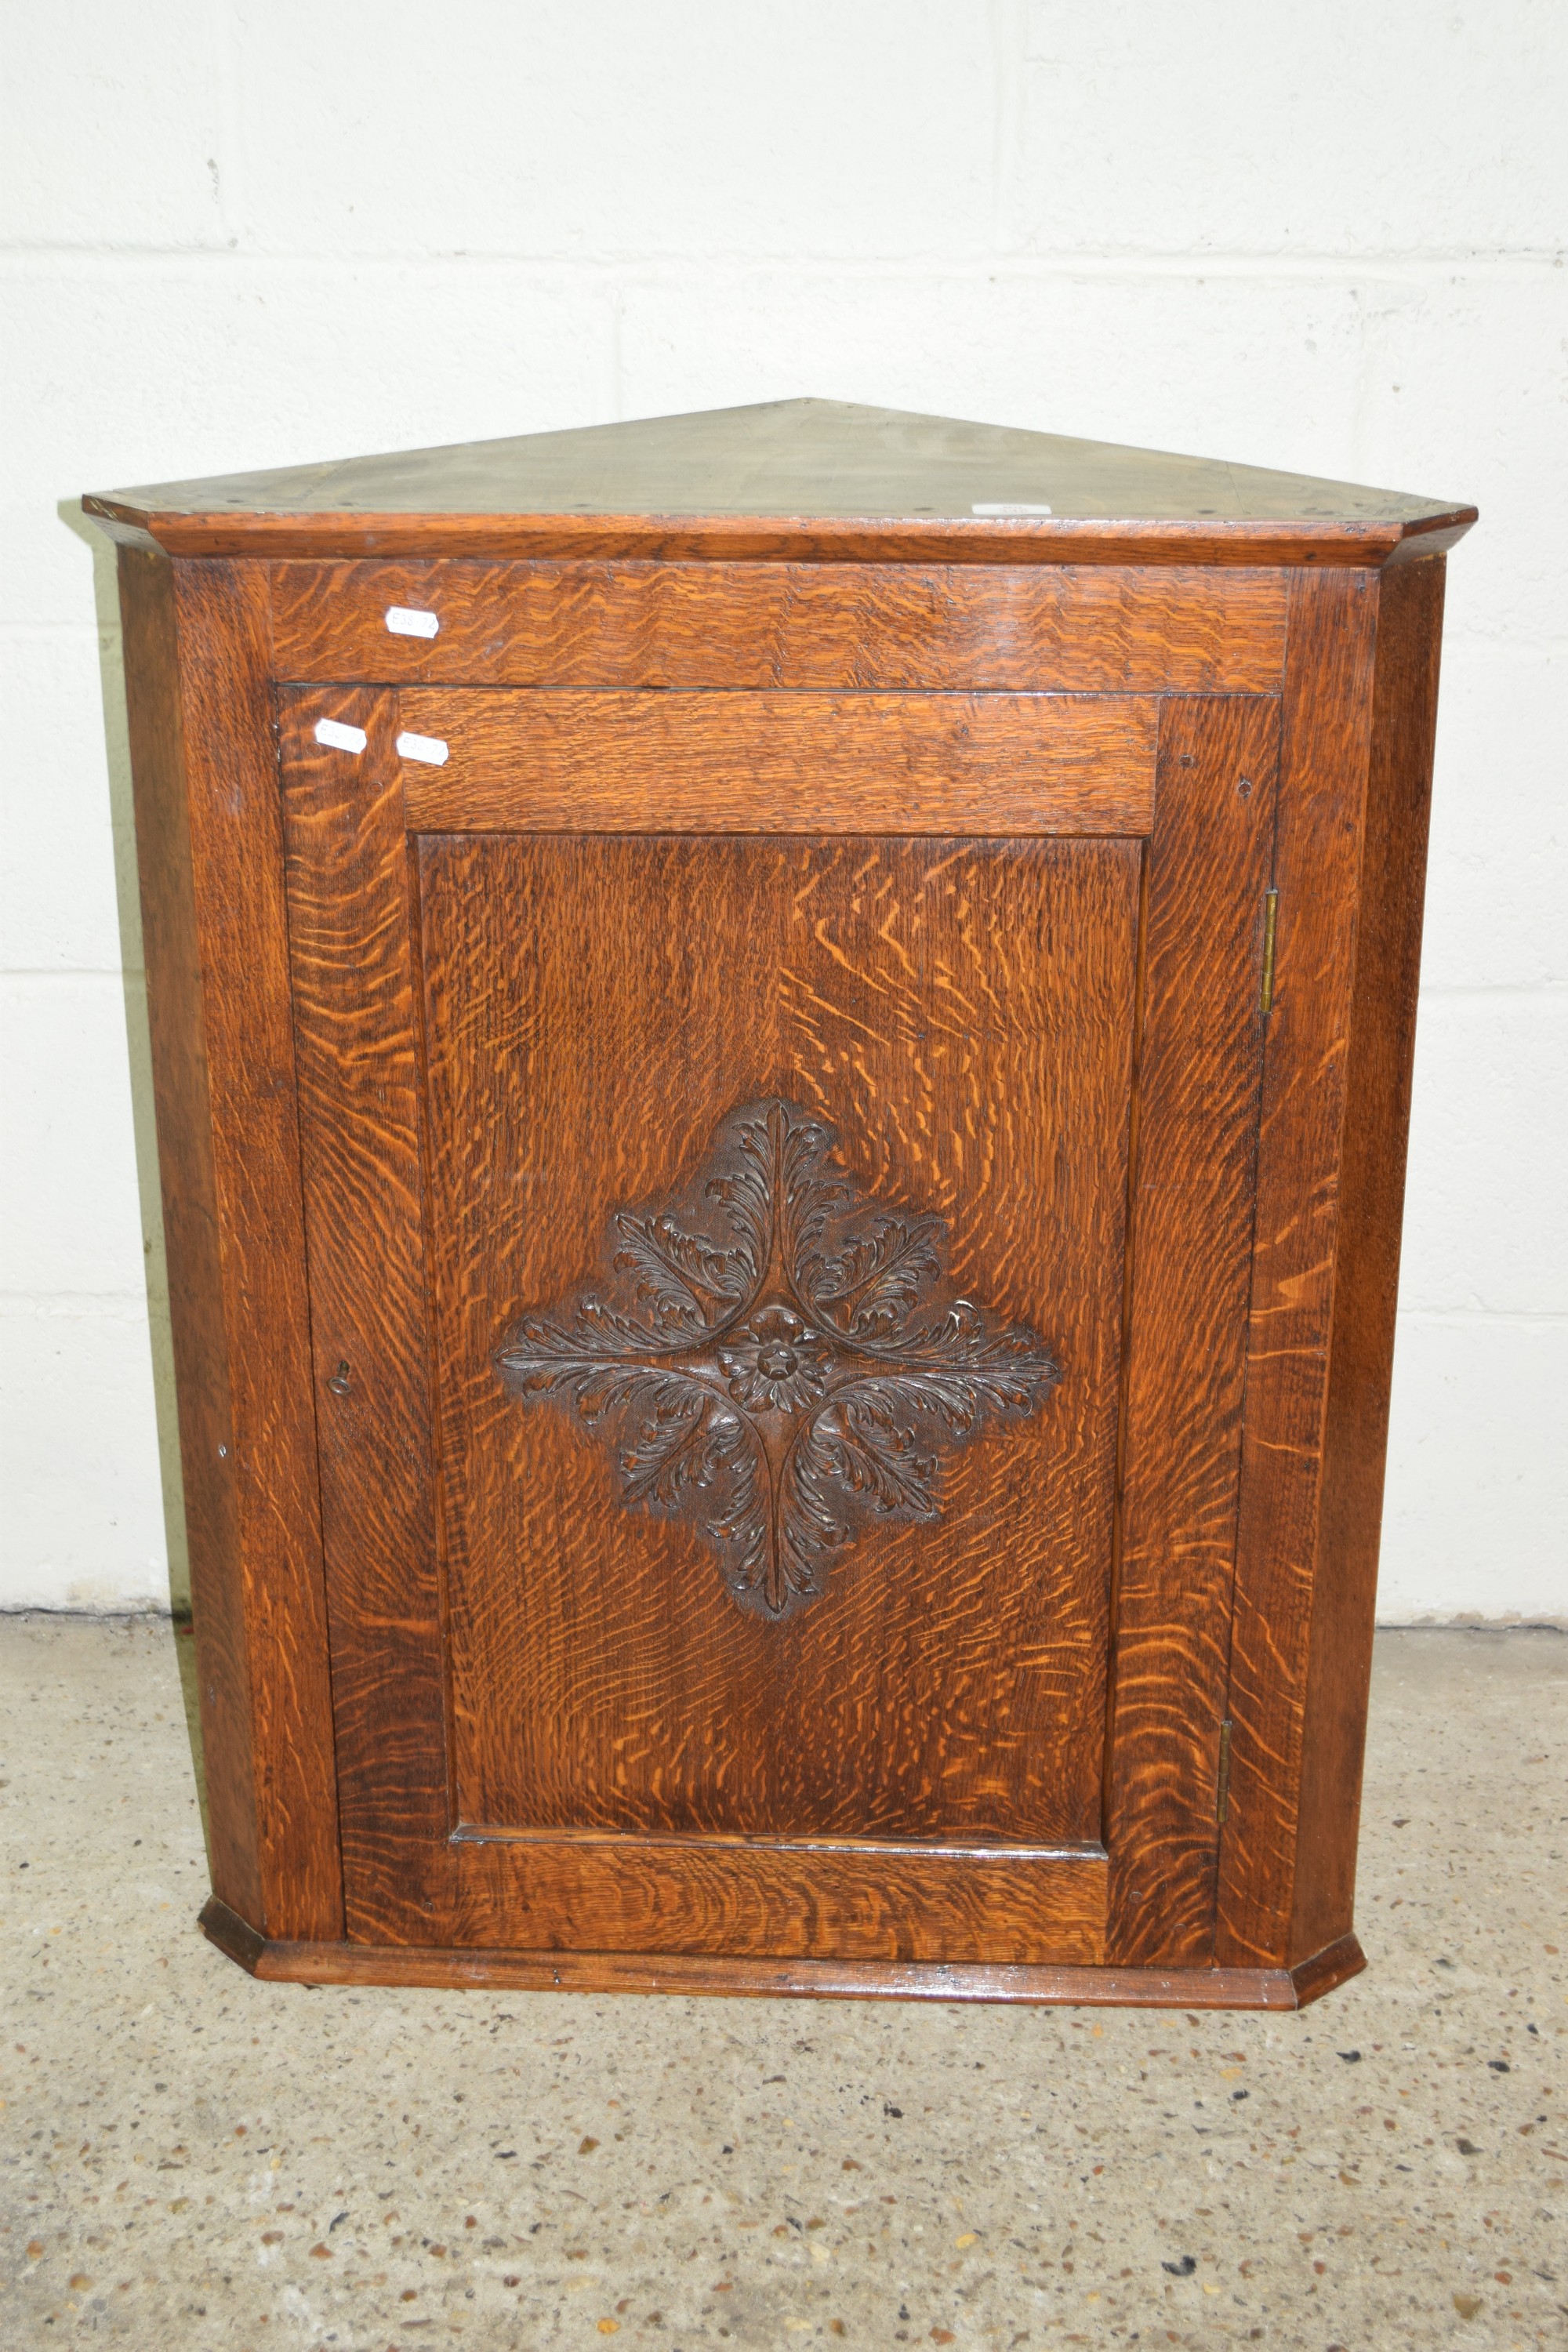 OAK CORNER WALL CUPBOARD WITH CARVED DECORATION, APPROX WIDTH 70CM MAX